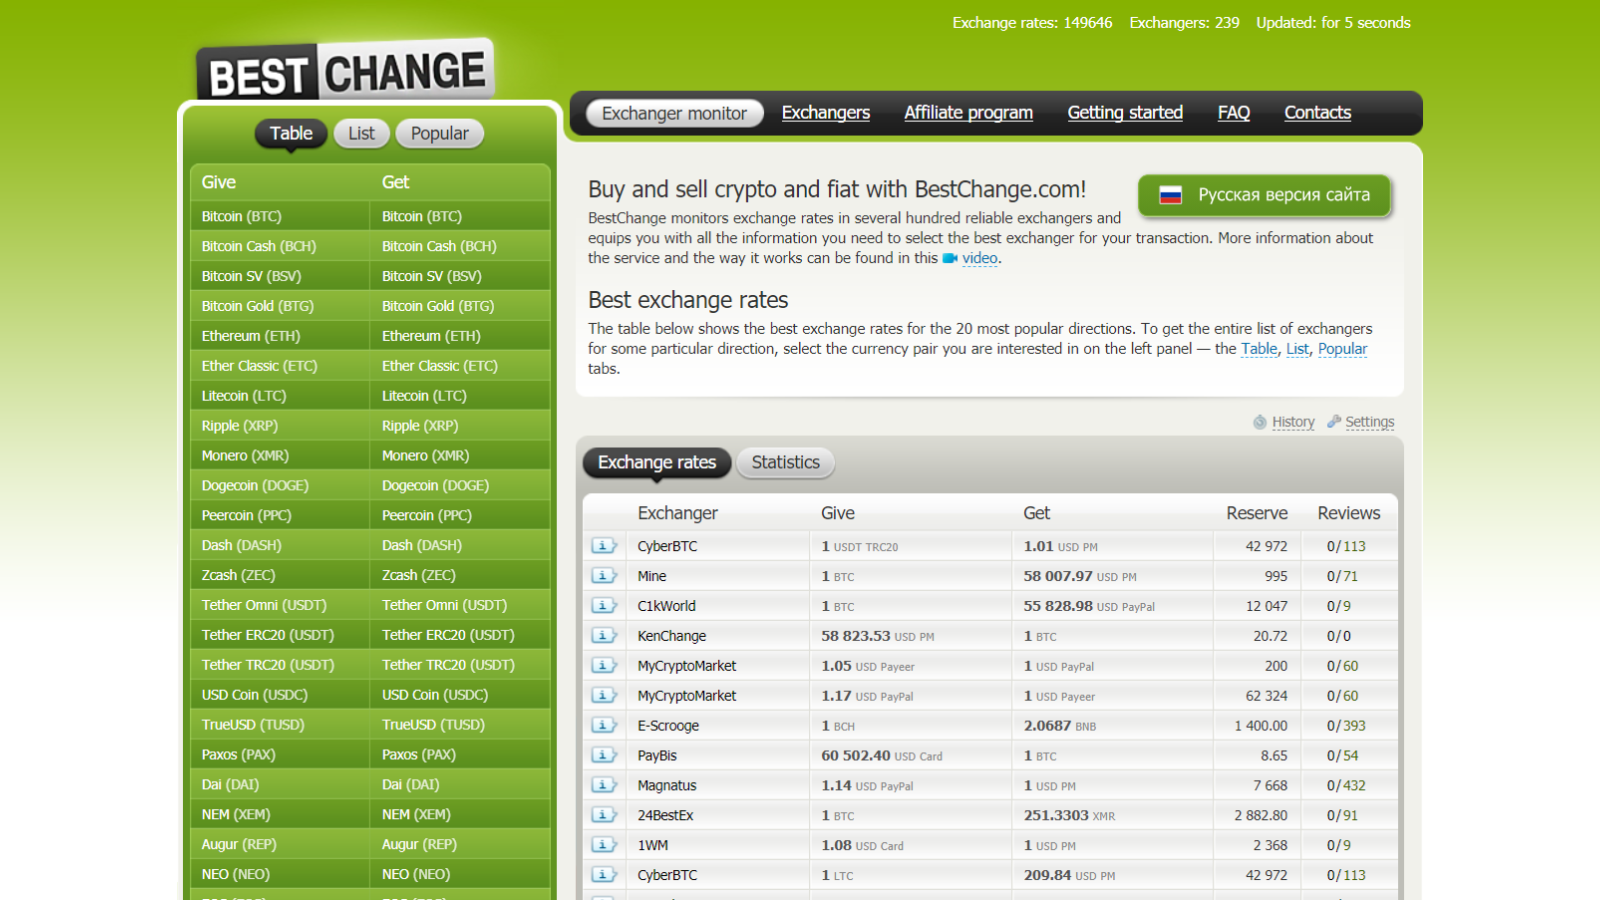 Bestchange resource launched in 2007